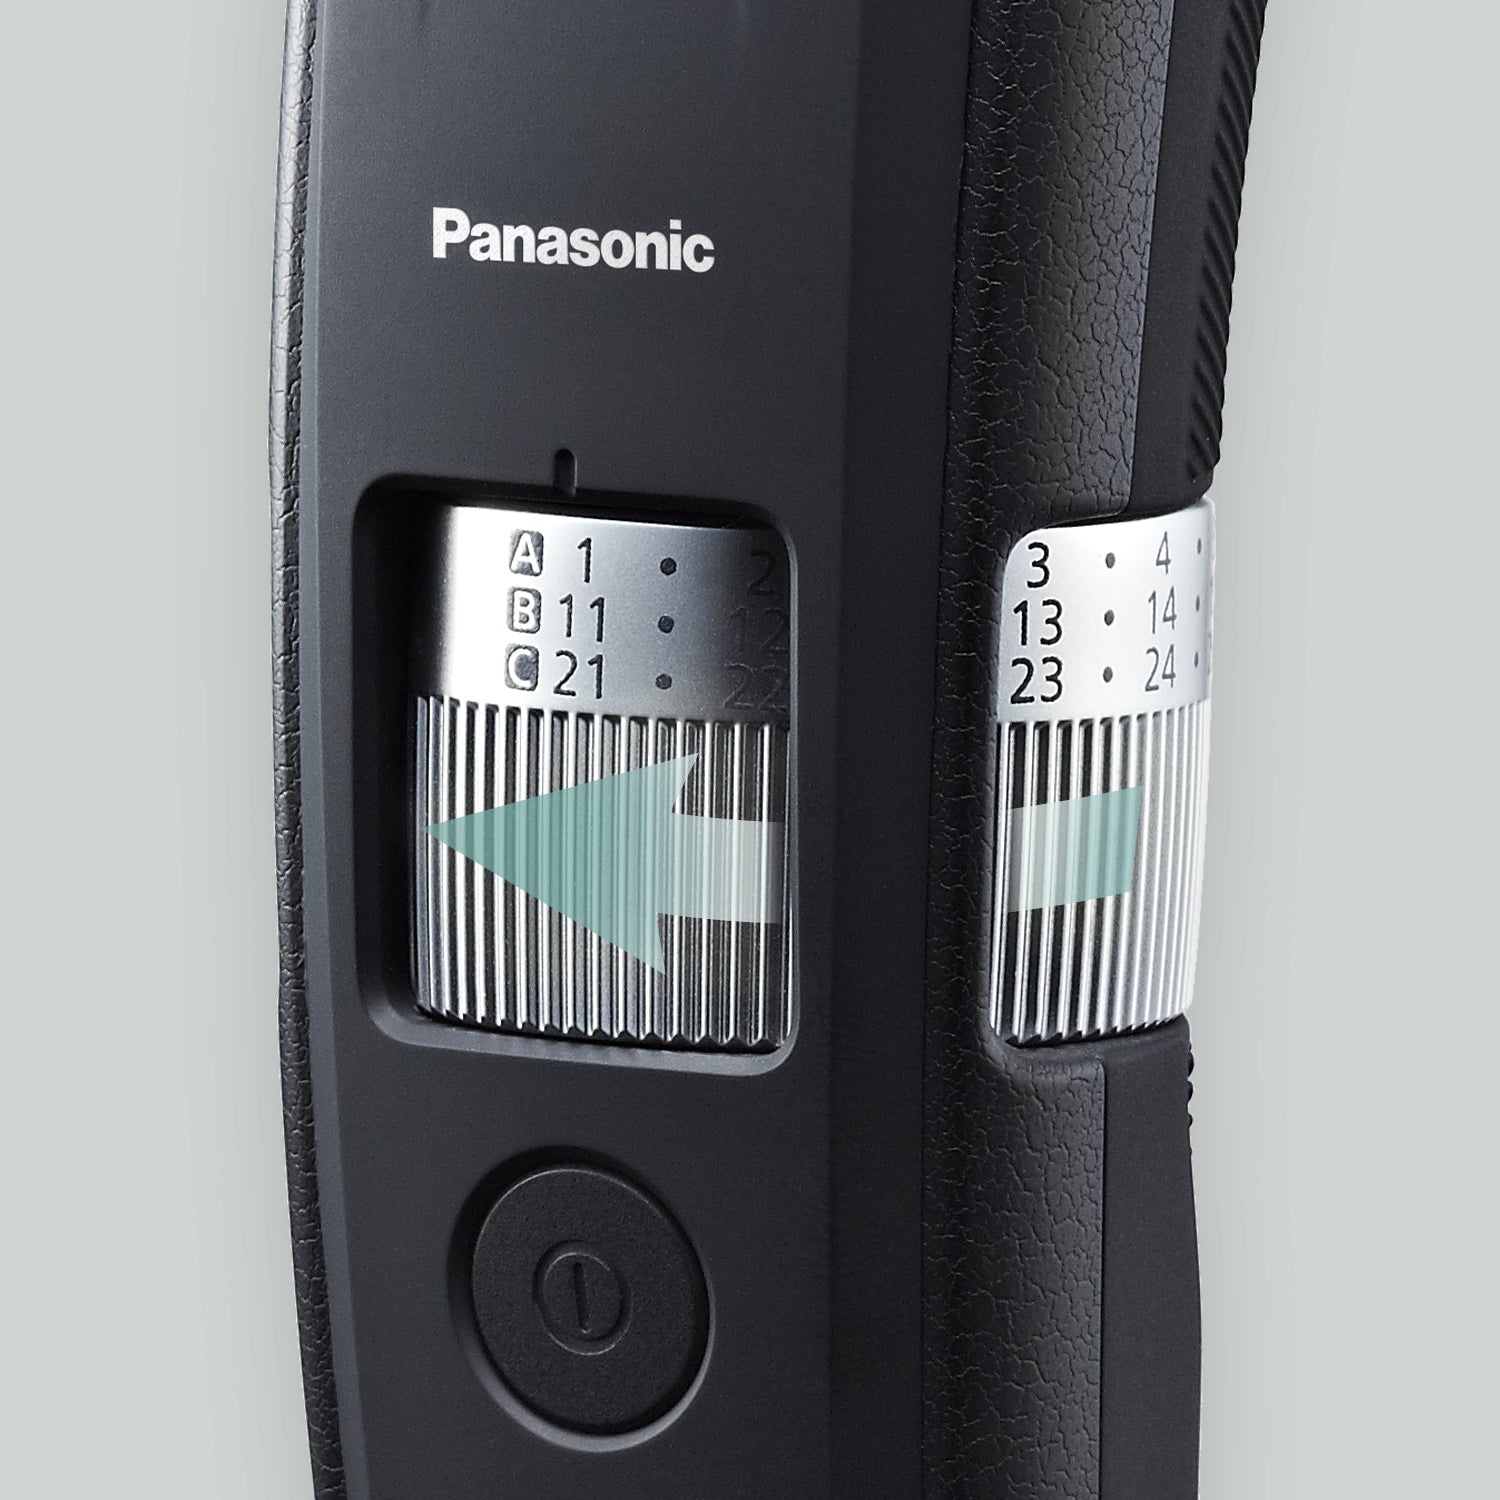 Panasonic Long Beard 58 Attachments and with Settings 4 Length Comb Trimmer Adjustable Hair - ER-GB96-K